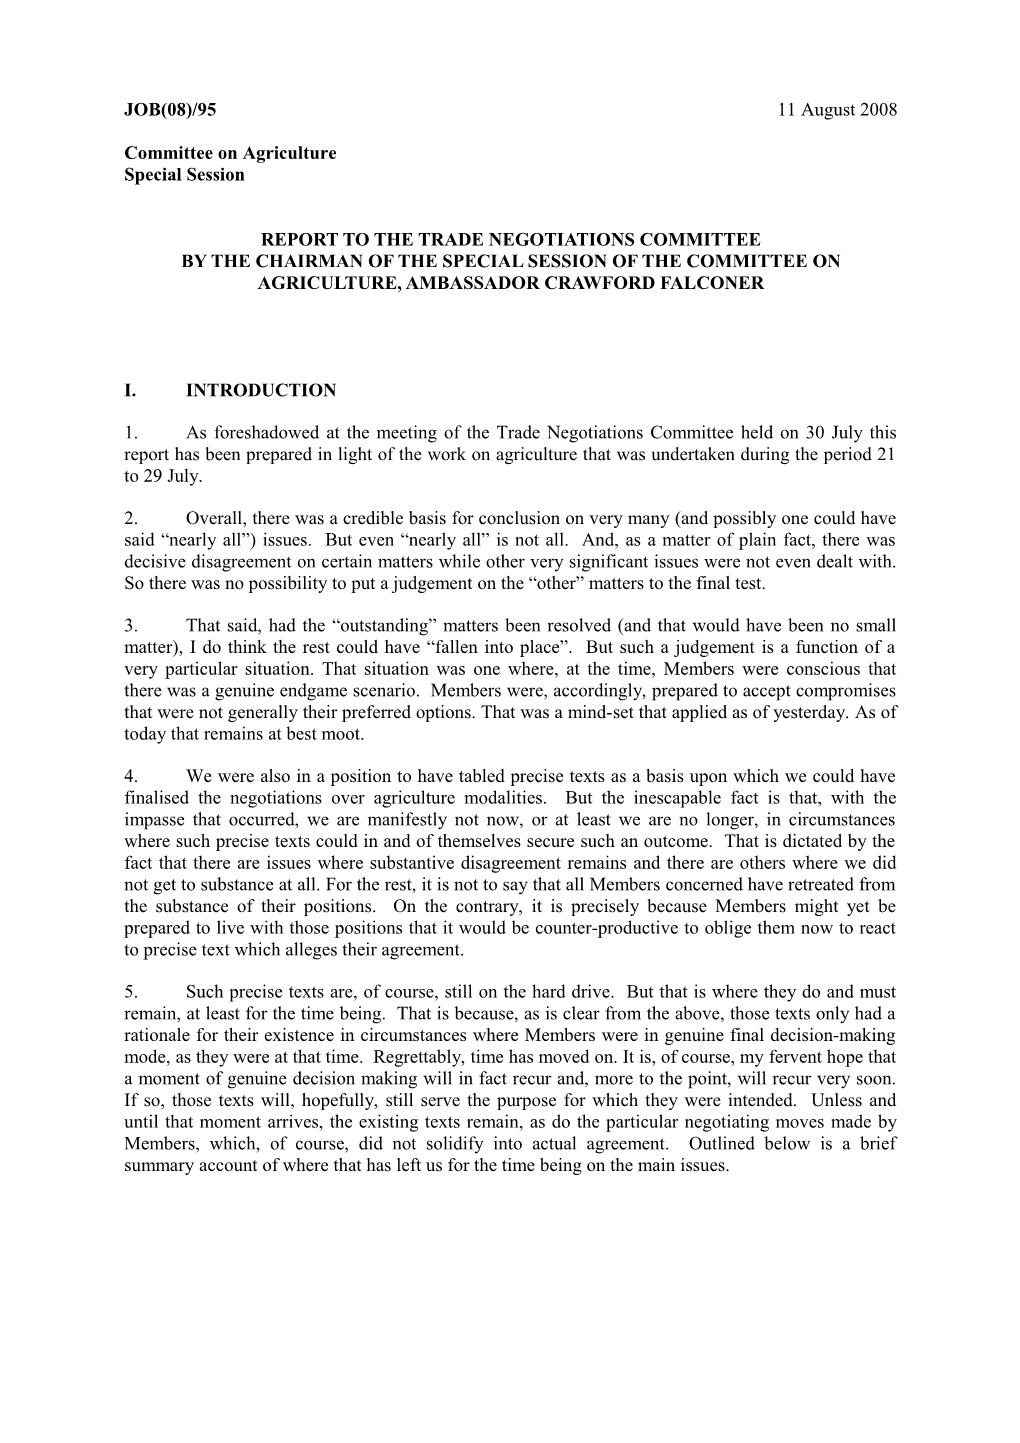 Report to the Trade Negotiations Committee